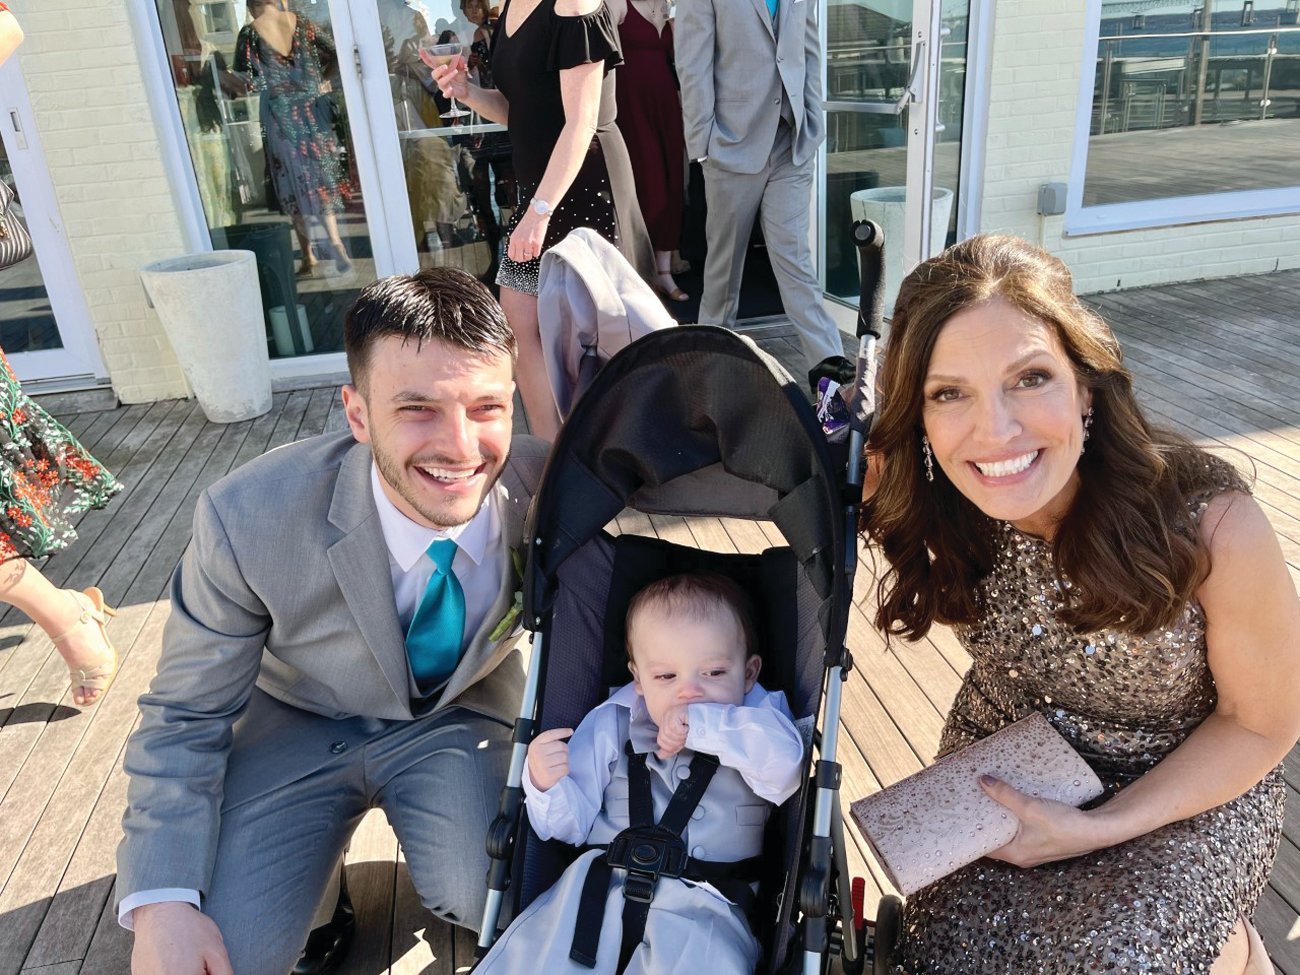 Groom Bryan Schnell shares a moment before the ceremony with his mother, Jana Schnell, and Jace, his infant son. Jace was born between Bryan and Caitlin’s 2020 and 2022 weddings.